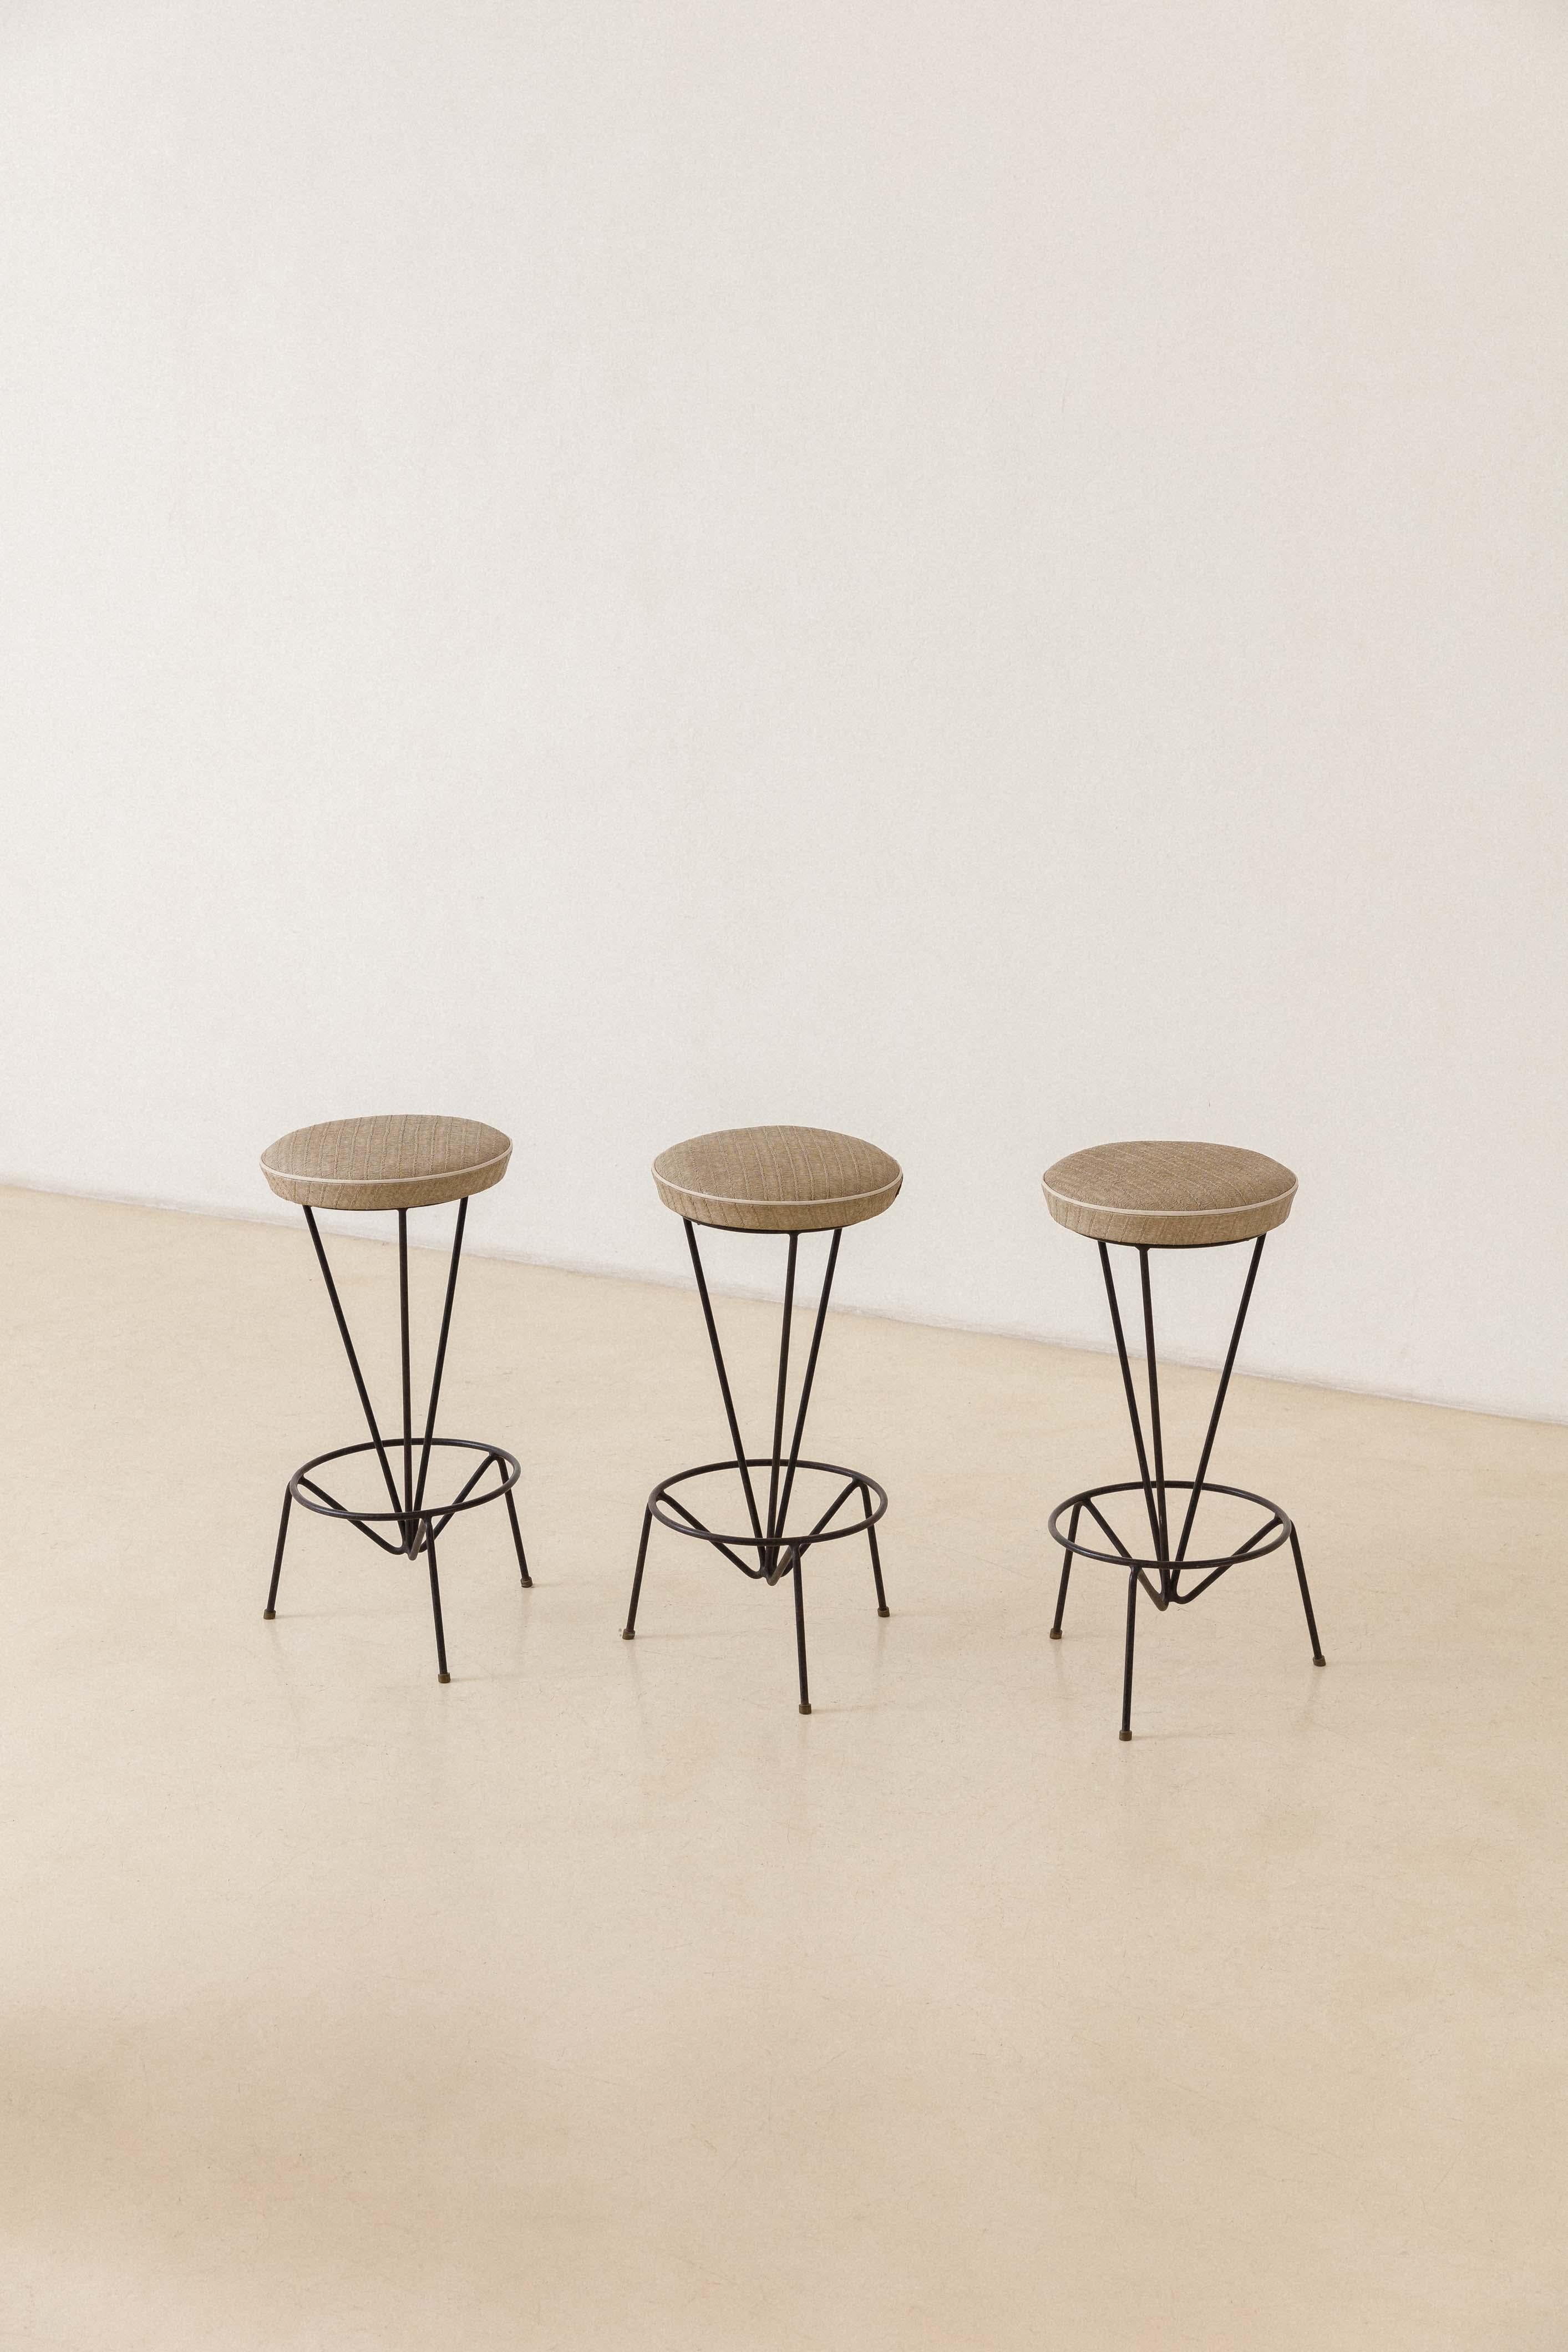 This fabulous high stool was designed by Martin Eisler and manufactured by Forma S.A. Móveis e Objetos de Arte in circa 1955. The piece is composed of an iron structure with brass tips with an upholstered seat. 

This particular design comprises